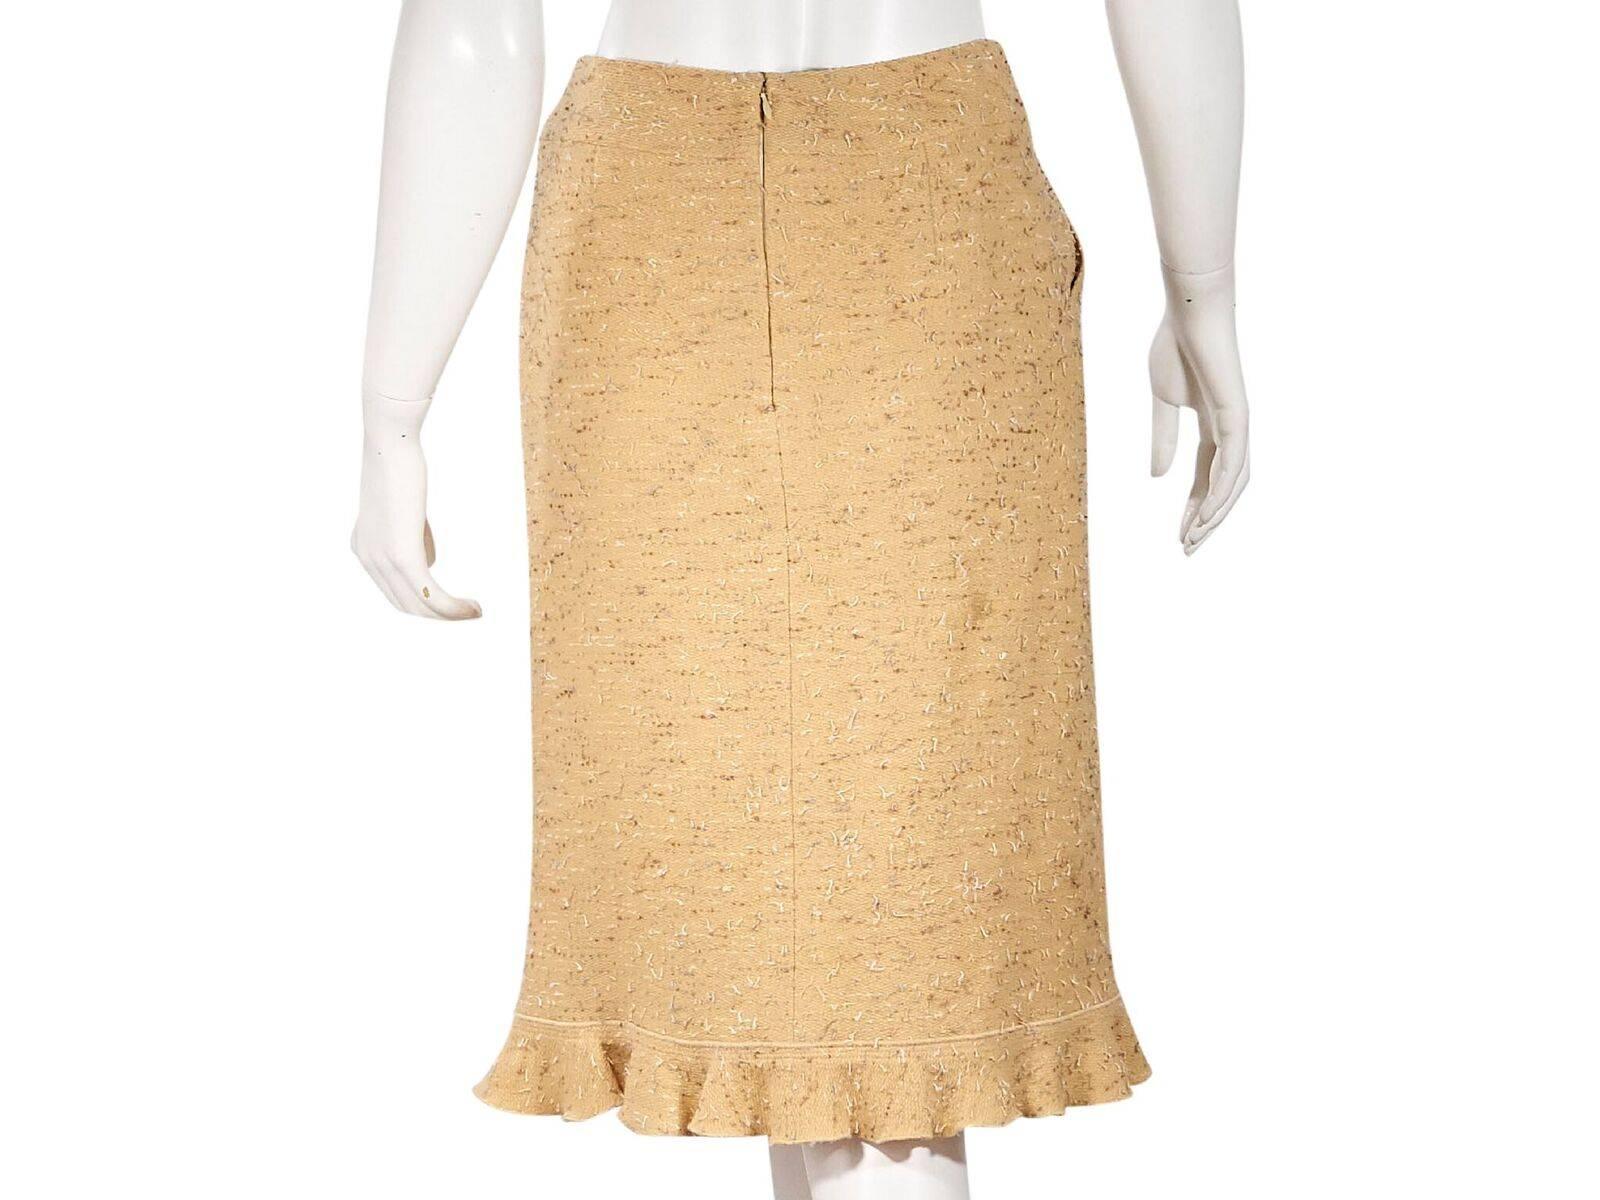 Product details:  Yellow tweed pencil skirt by Chanel.  Banded waist.  Waist slide pockets.  Concealed back zip closure.  Ruffle hem.  Label size FR 36.  27